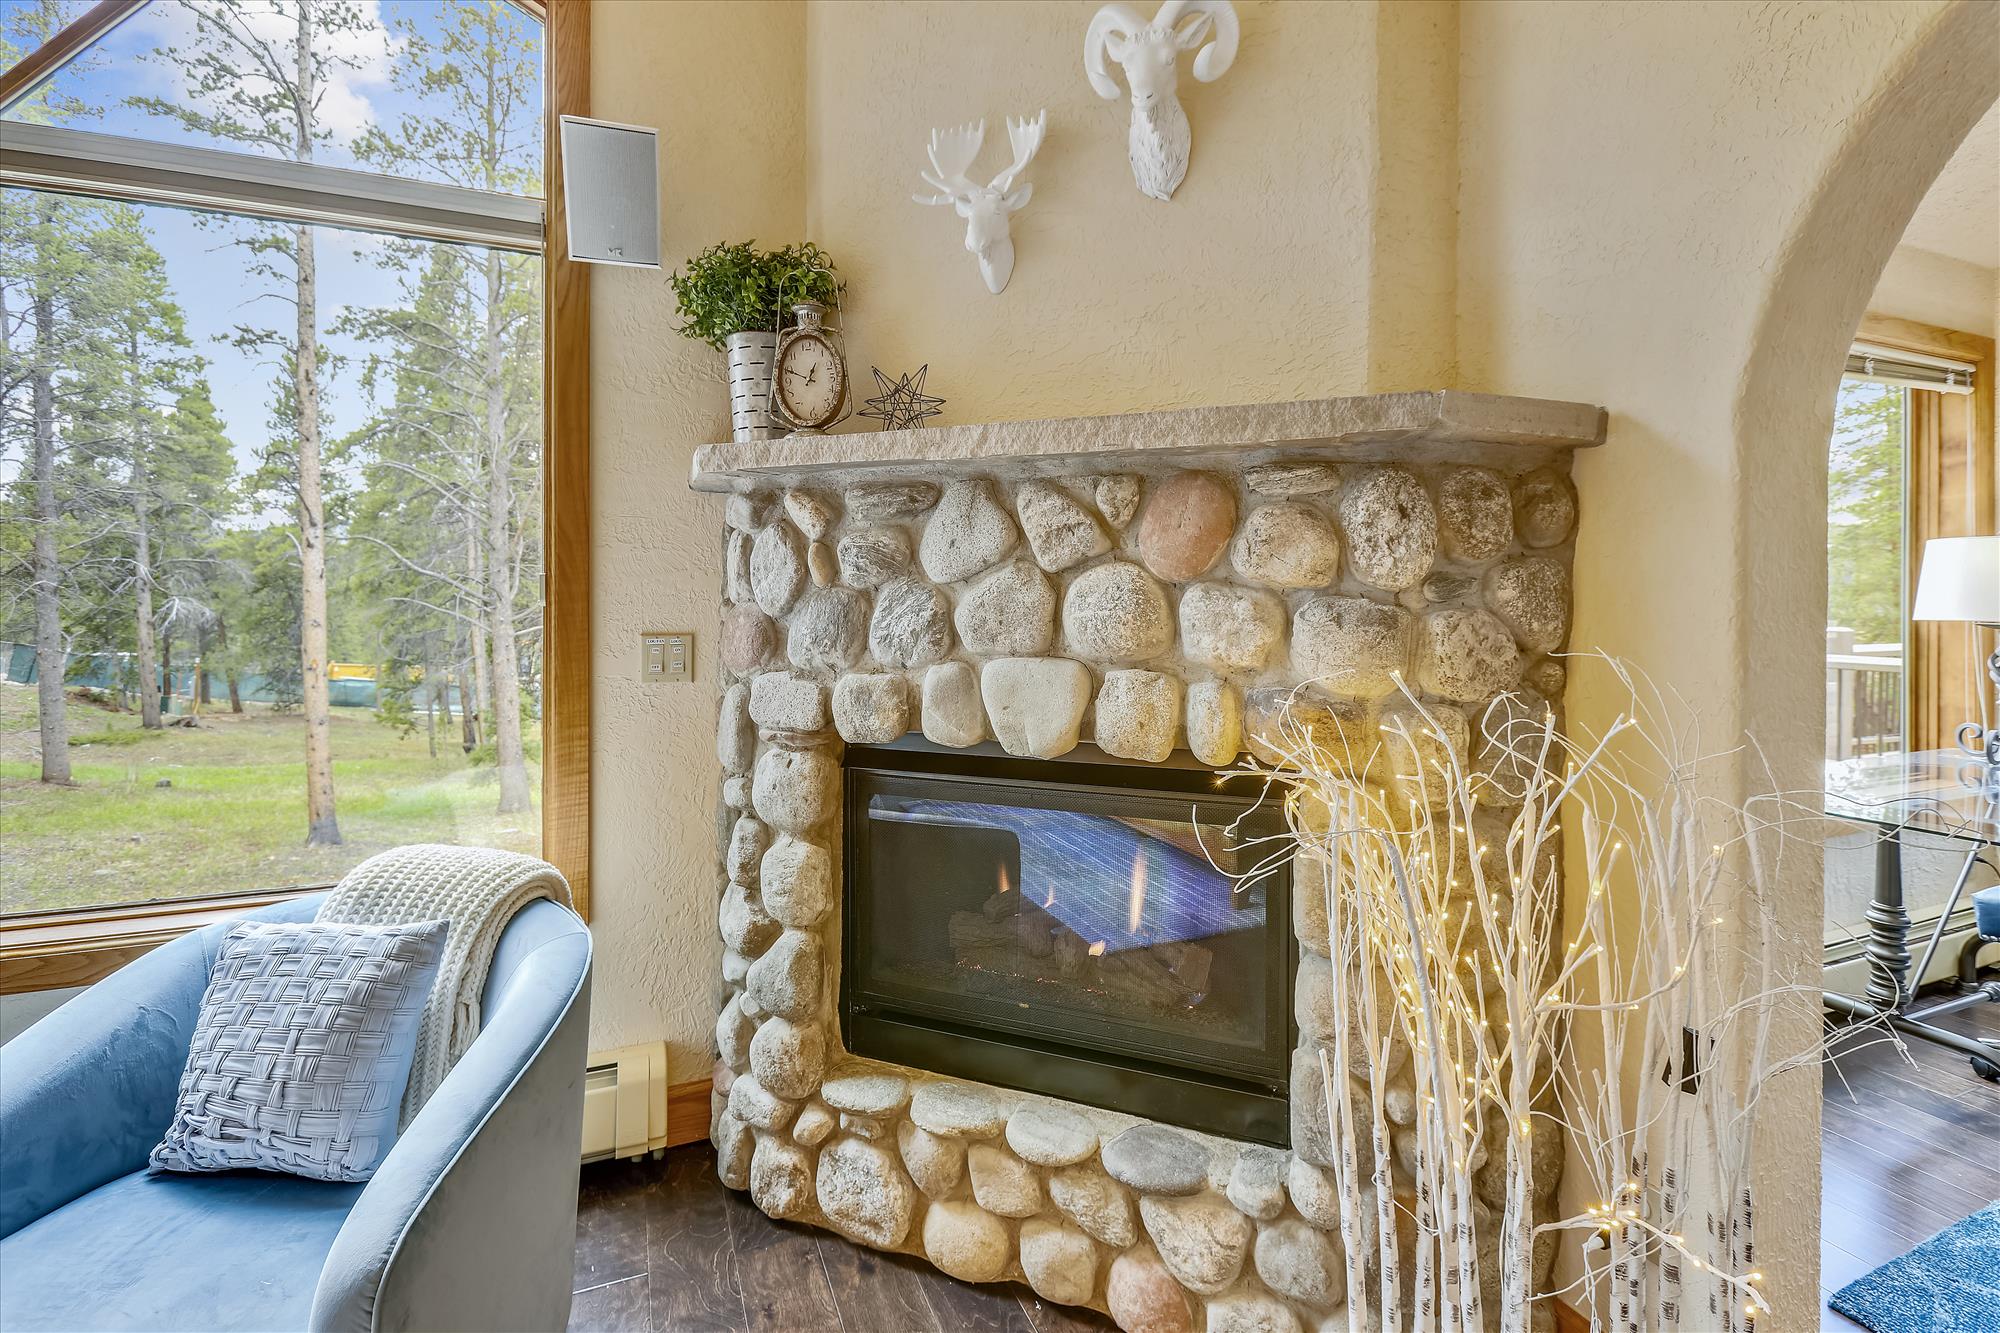 Additional view of the master bedroom gas fireplace - Evergreen Lodge Breckenridge Vacation Rental